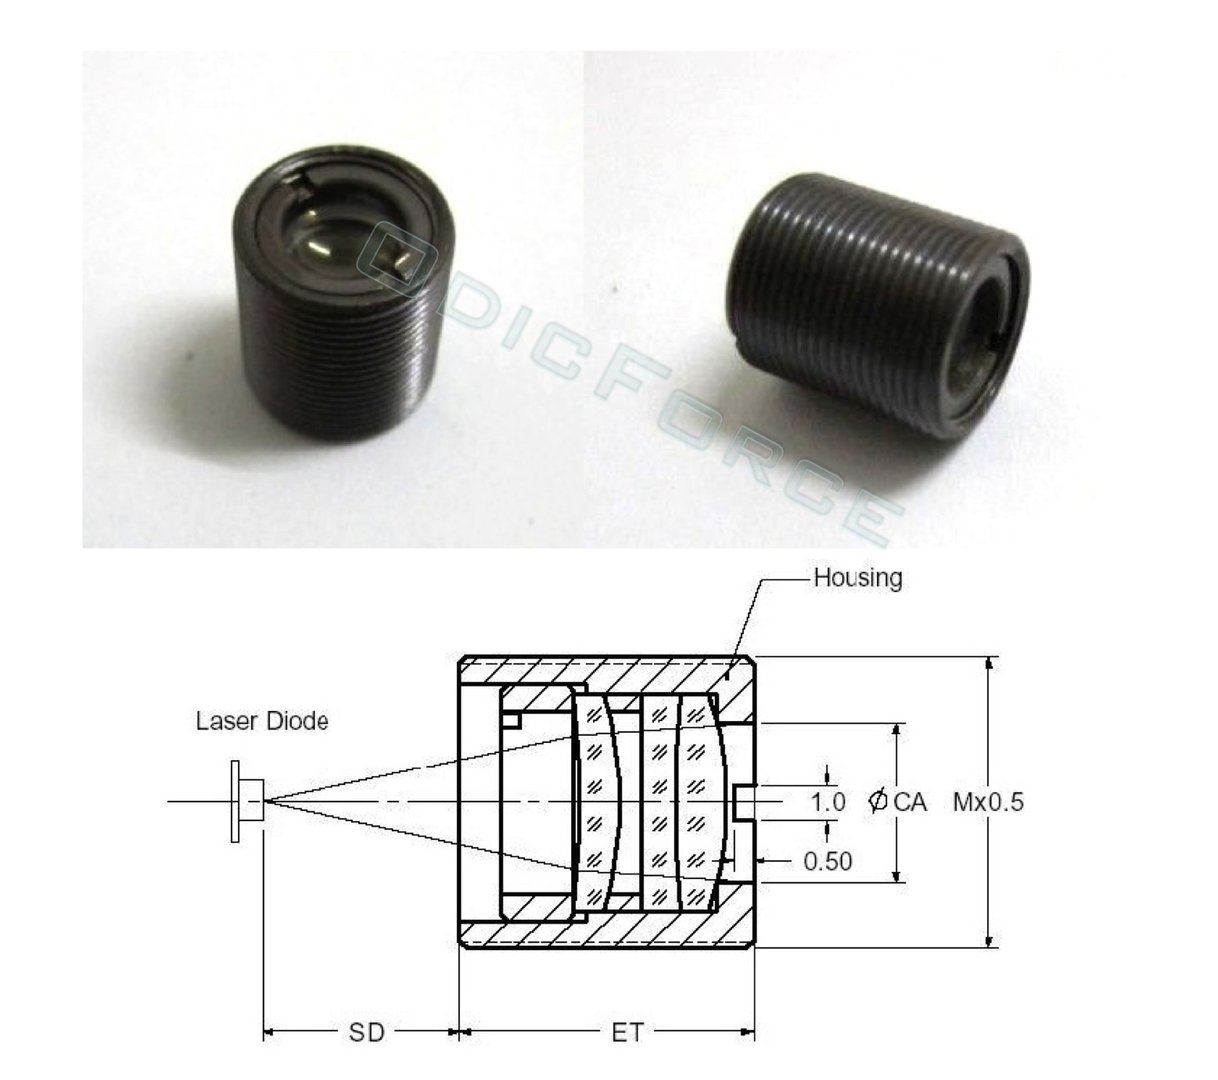 G-2 Coated Glass Collimating Lens Focus Lense for 405nm 450nm Blue Laser Diode w M90.5 Holder 